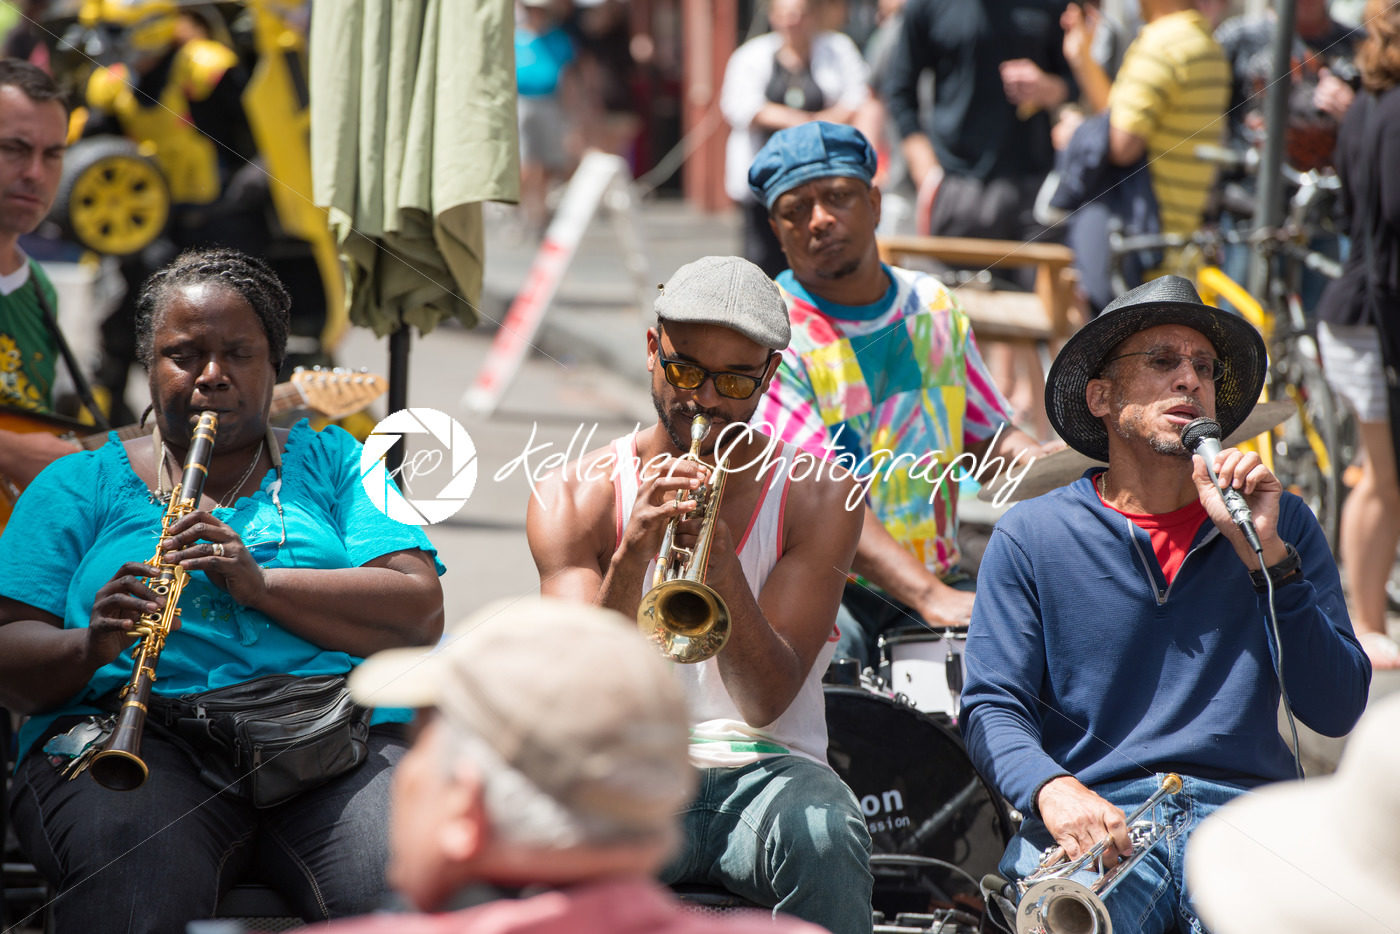 NEW ORLEANS – APRIL 13: In New Orleans, a jazz band plays jazz melodies in the street for donations from the tourists and locals passing by on April 13, 2014 - Kelleher Photography Store